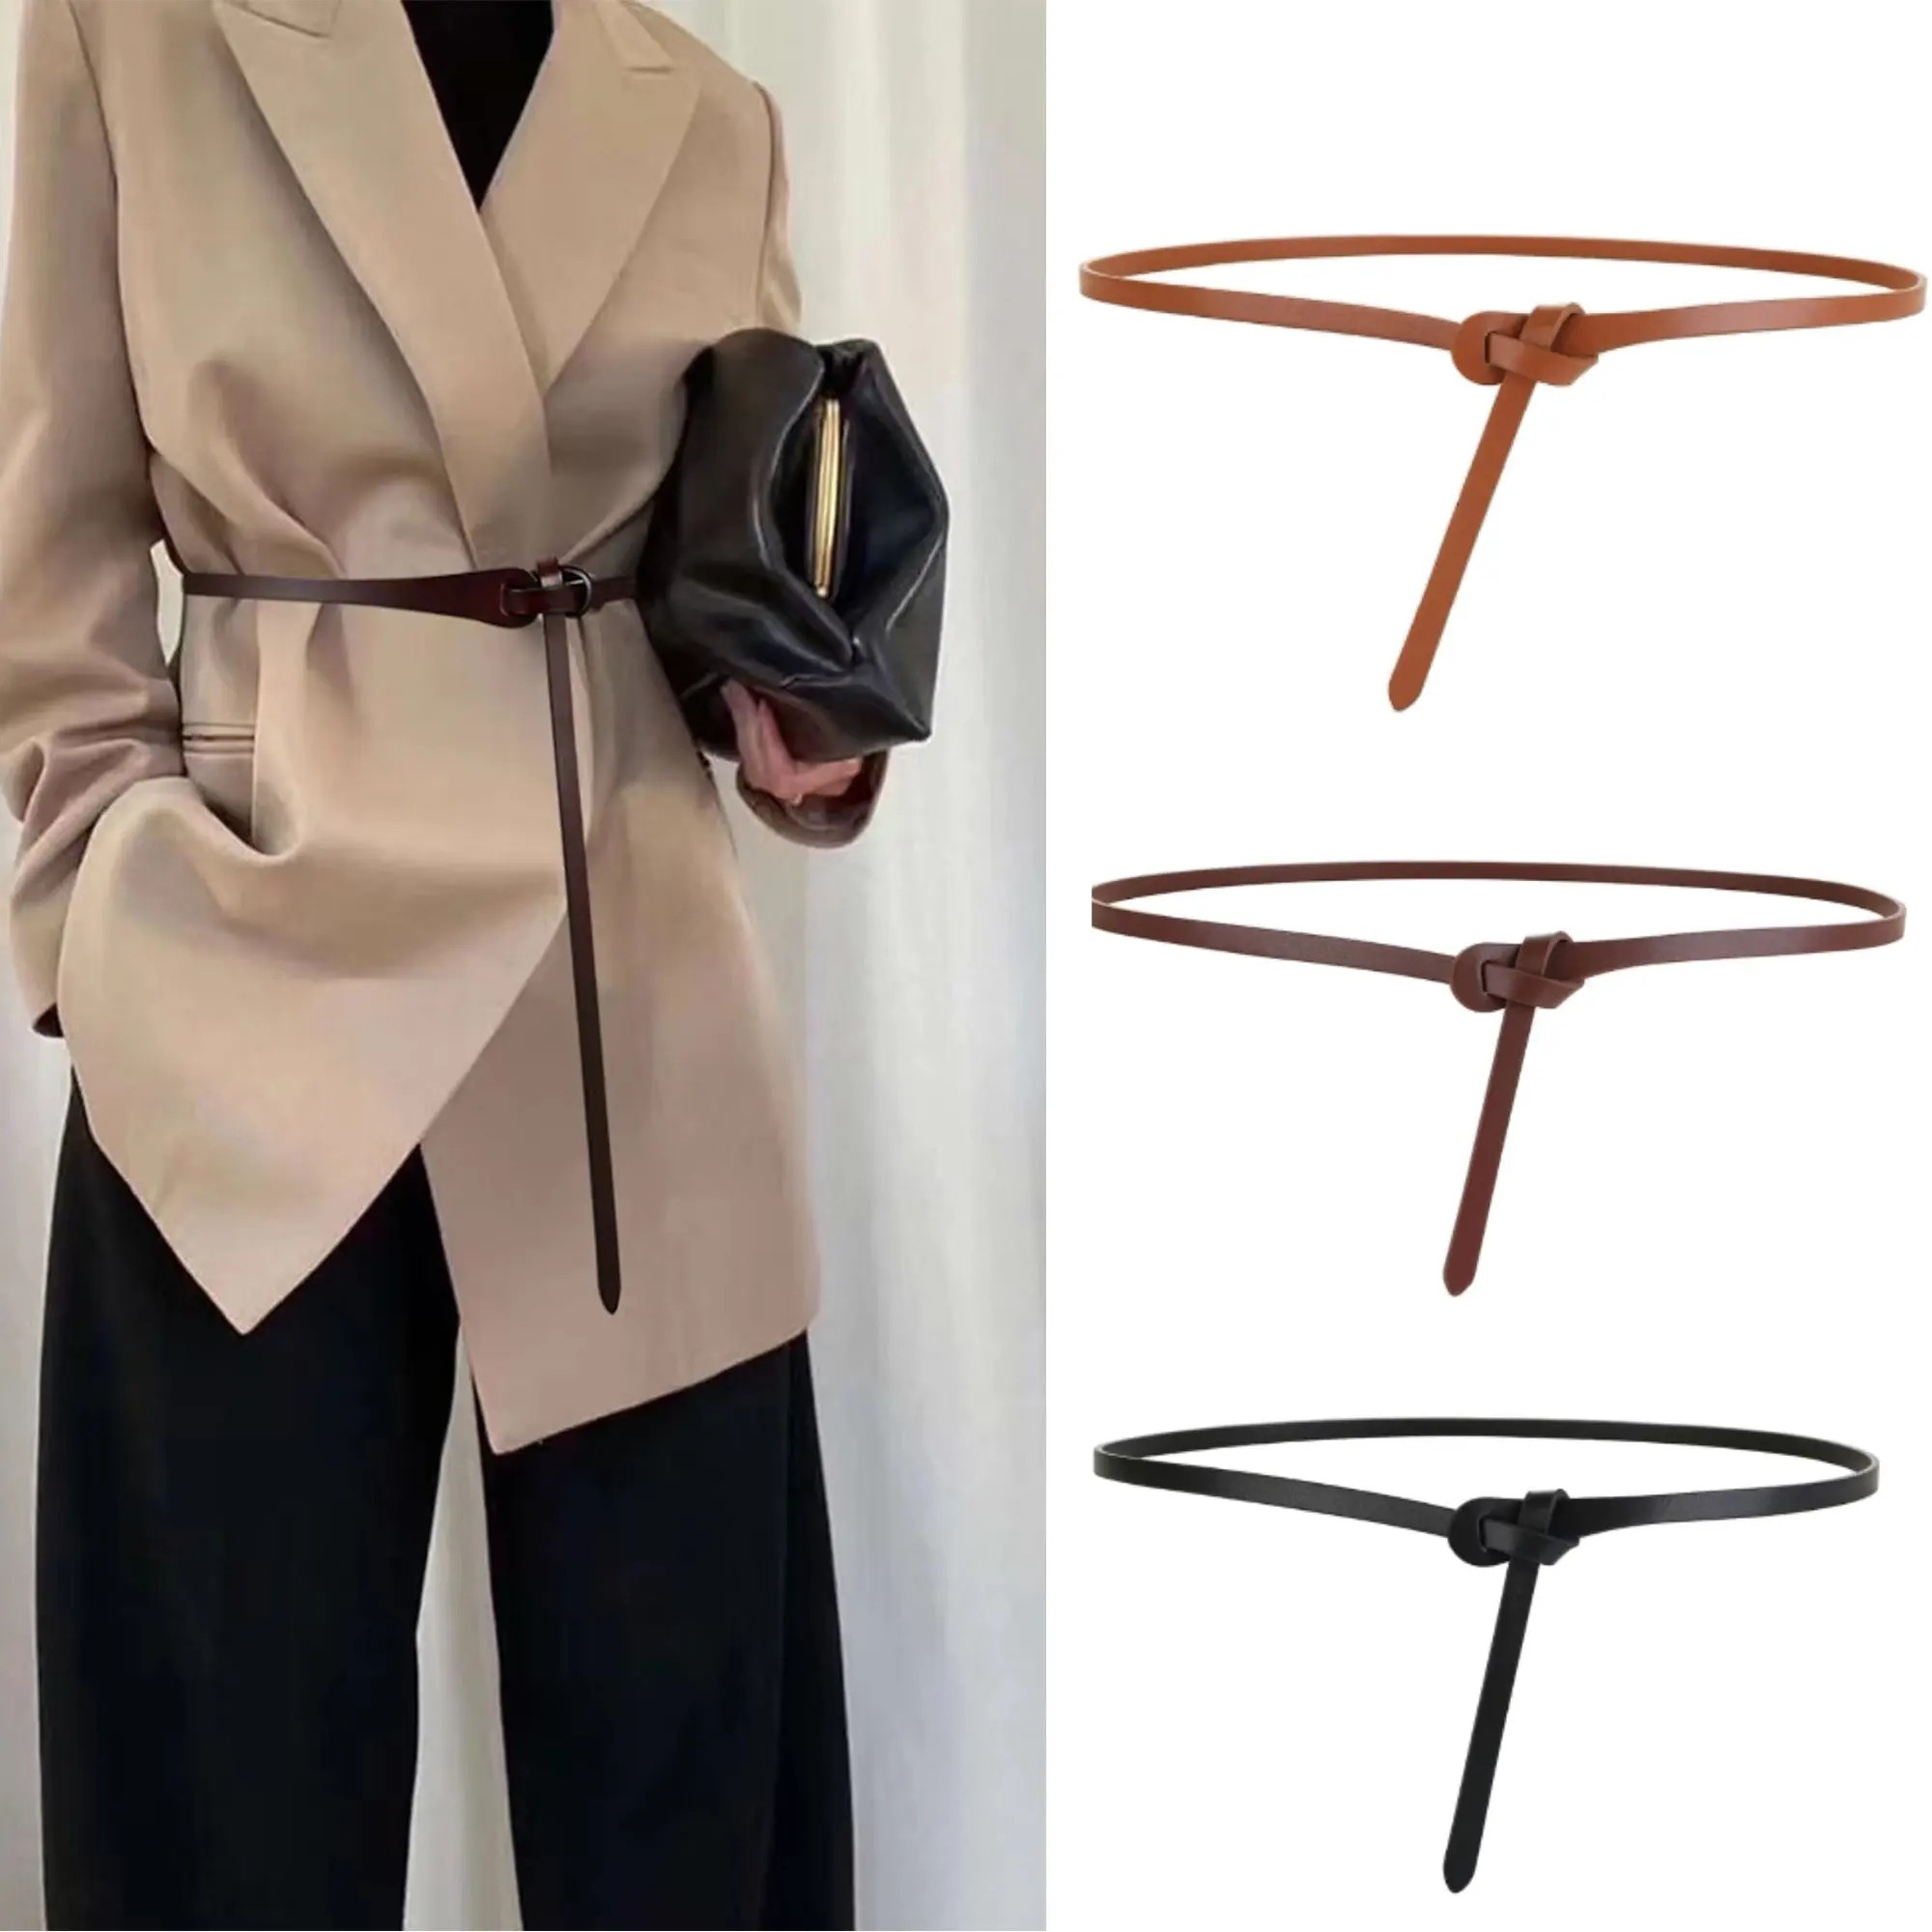 

Vintage Knotted Thin Belt Elegant Simple Casual Dress Belt Classic Sweater Shirt Waistband Accessories For Women